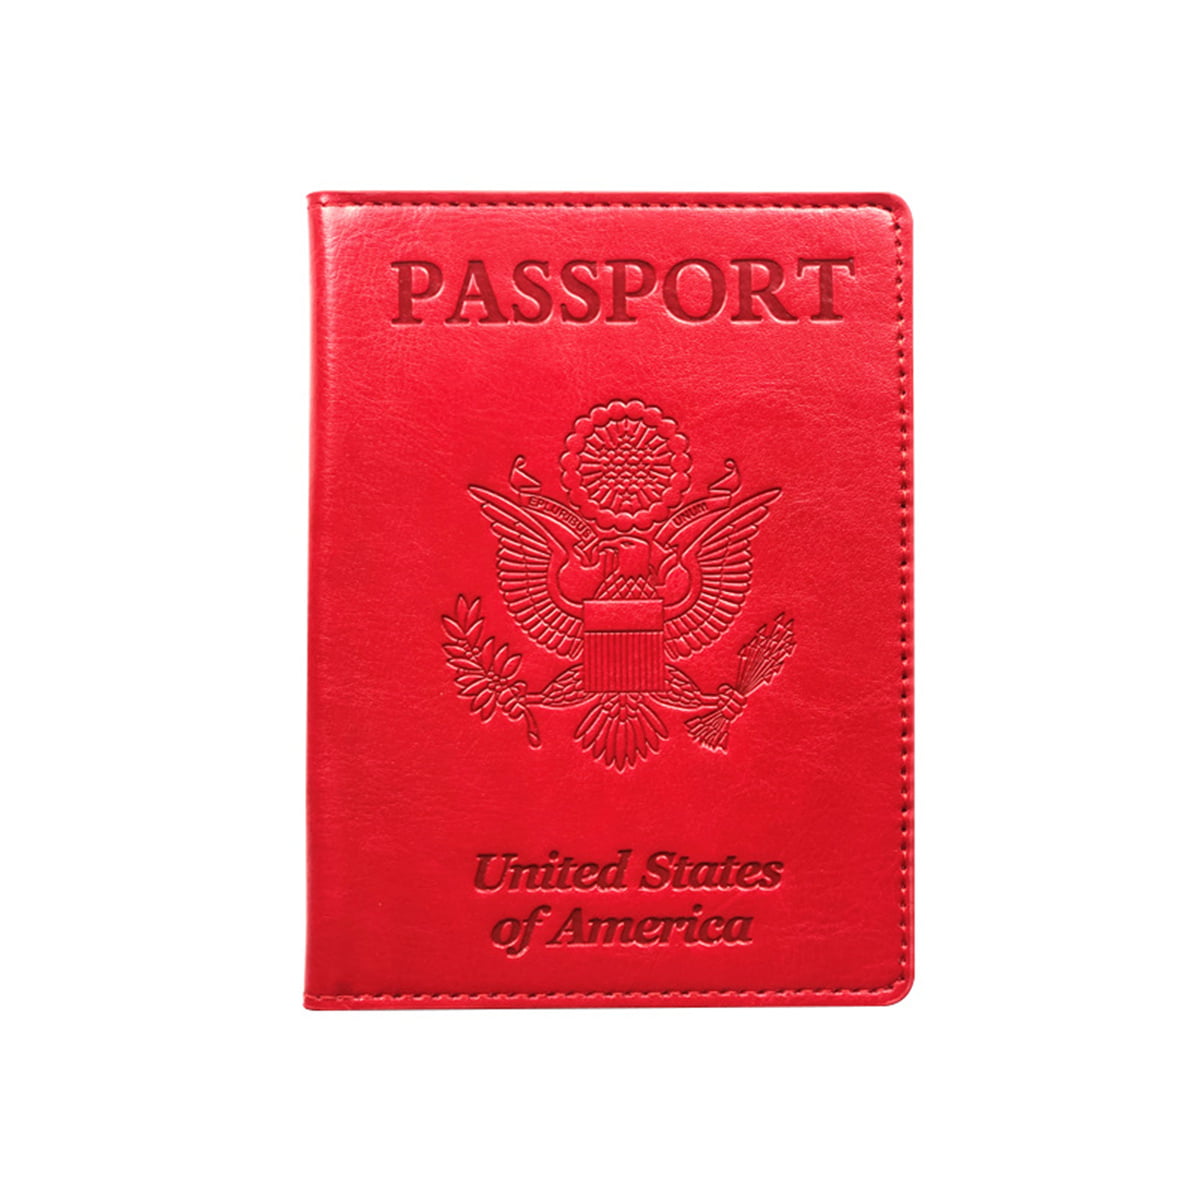 Details about   Simple PU Leather Passport Cover Protector ID Name Card Case Pouch Travel Wallet